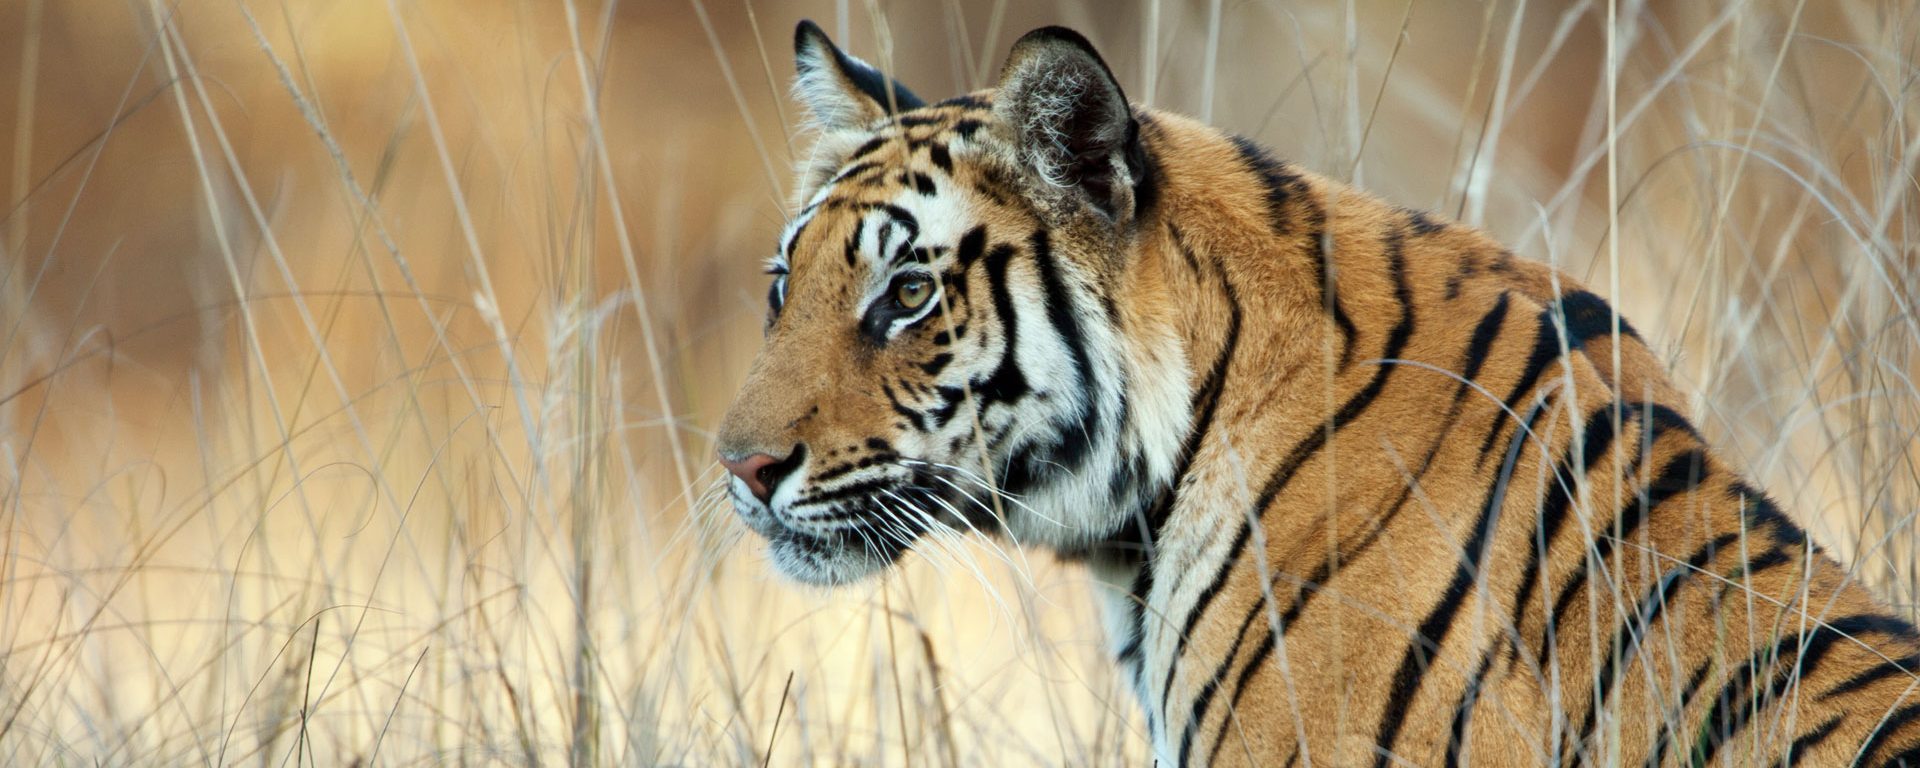 A watchful Bengal Tiger in long grass, Bandhavgarh National Park, India